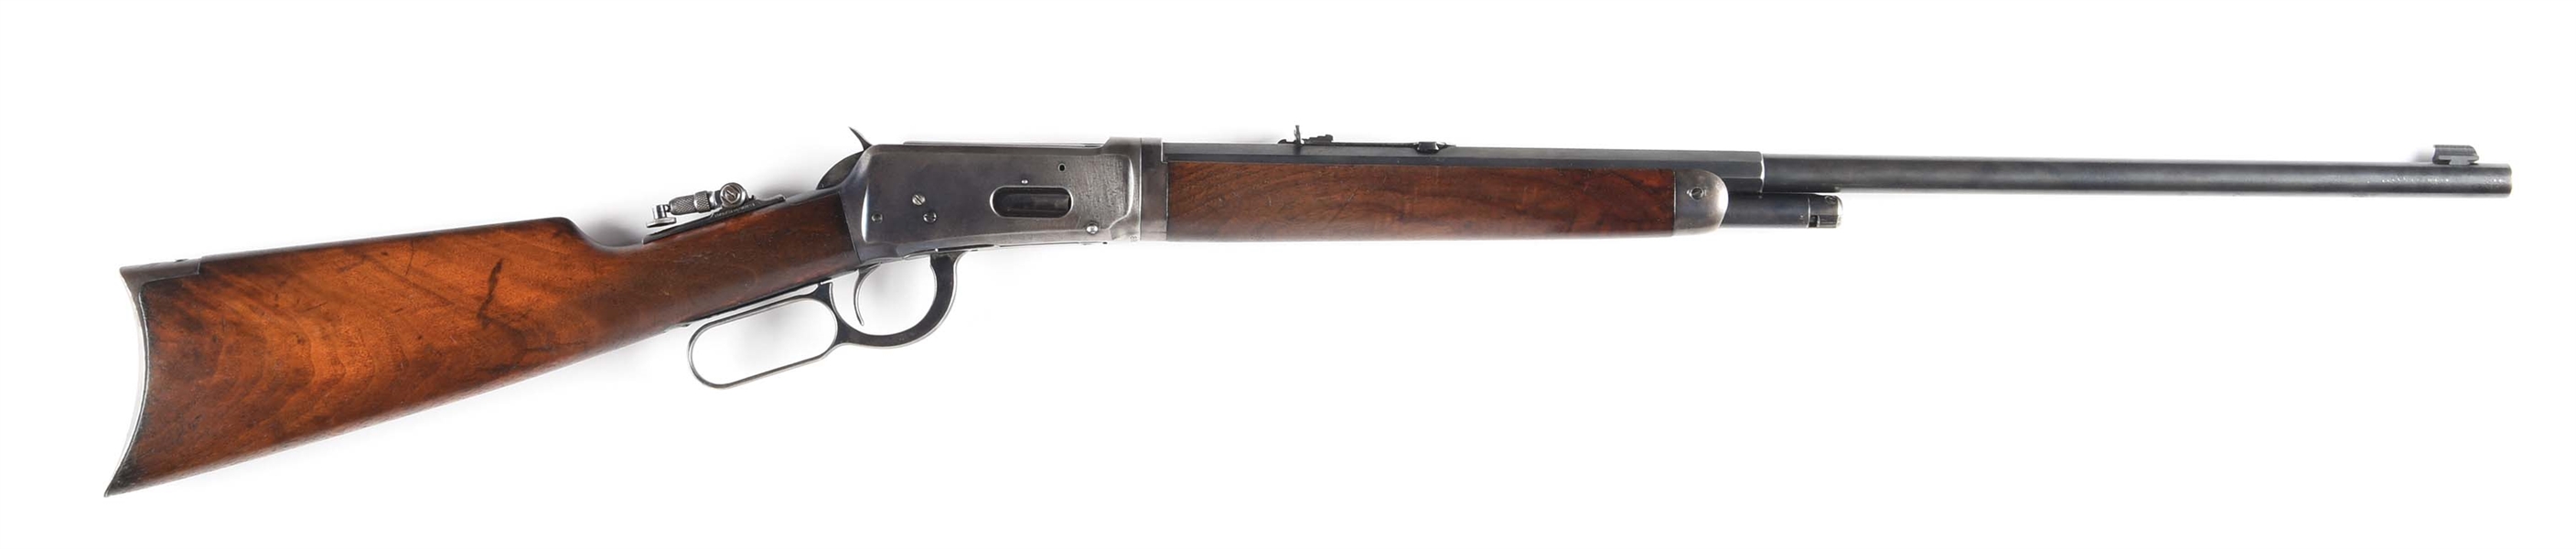 (C) WINCHESTER MODEL 1894 LEVER ACTION TAKEDOWN RIFLE (1921).